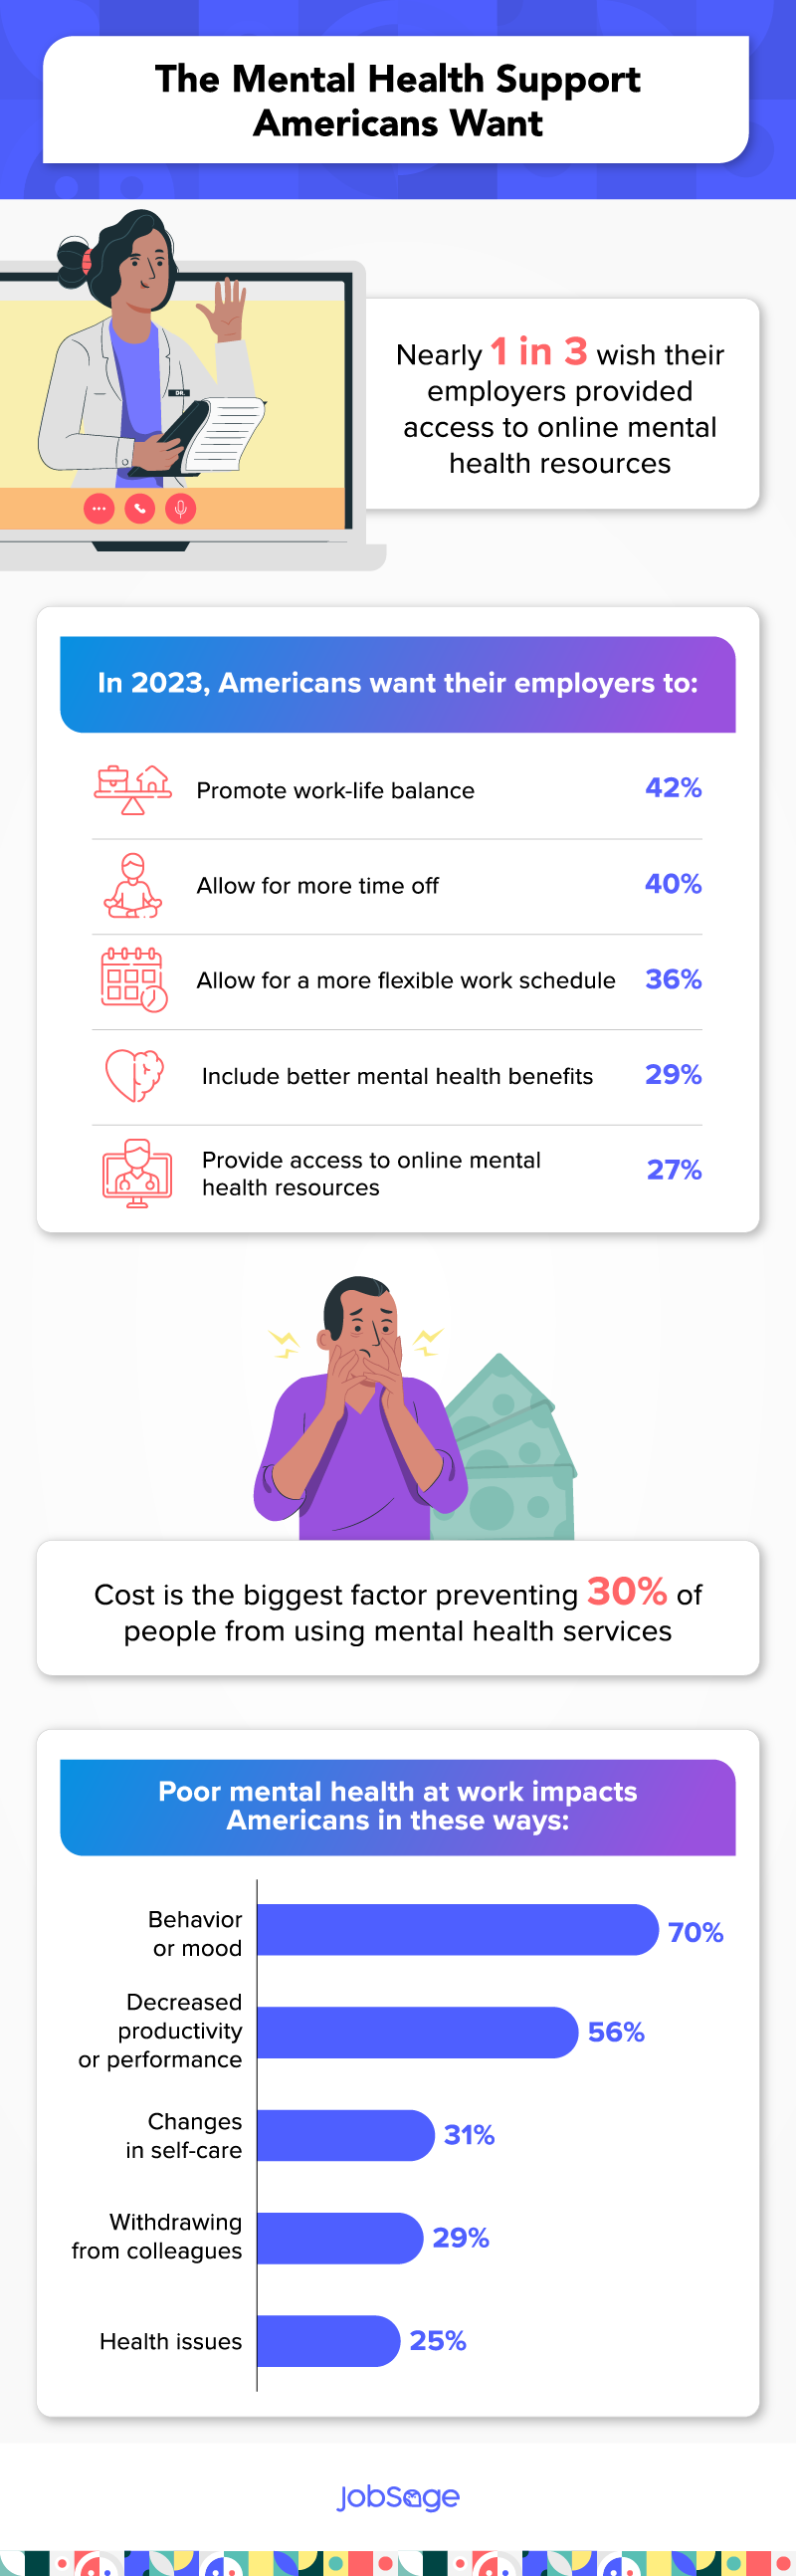 mental support benefits employees want 